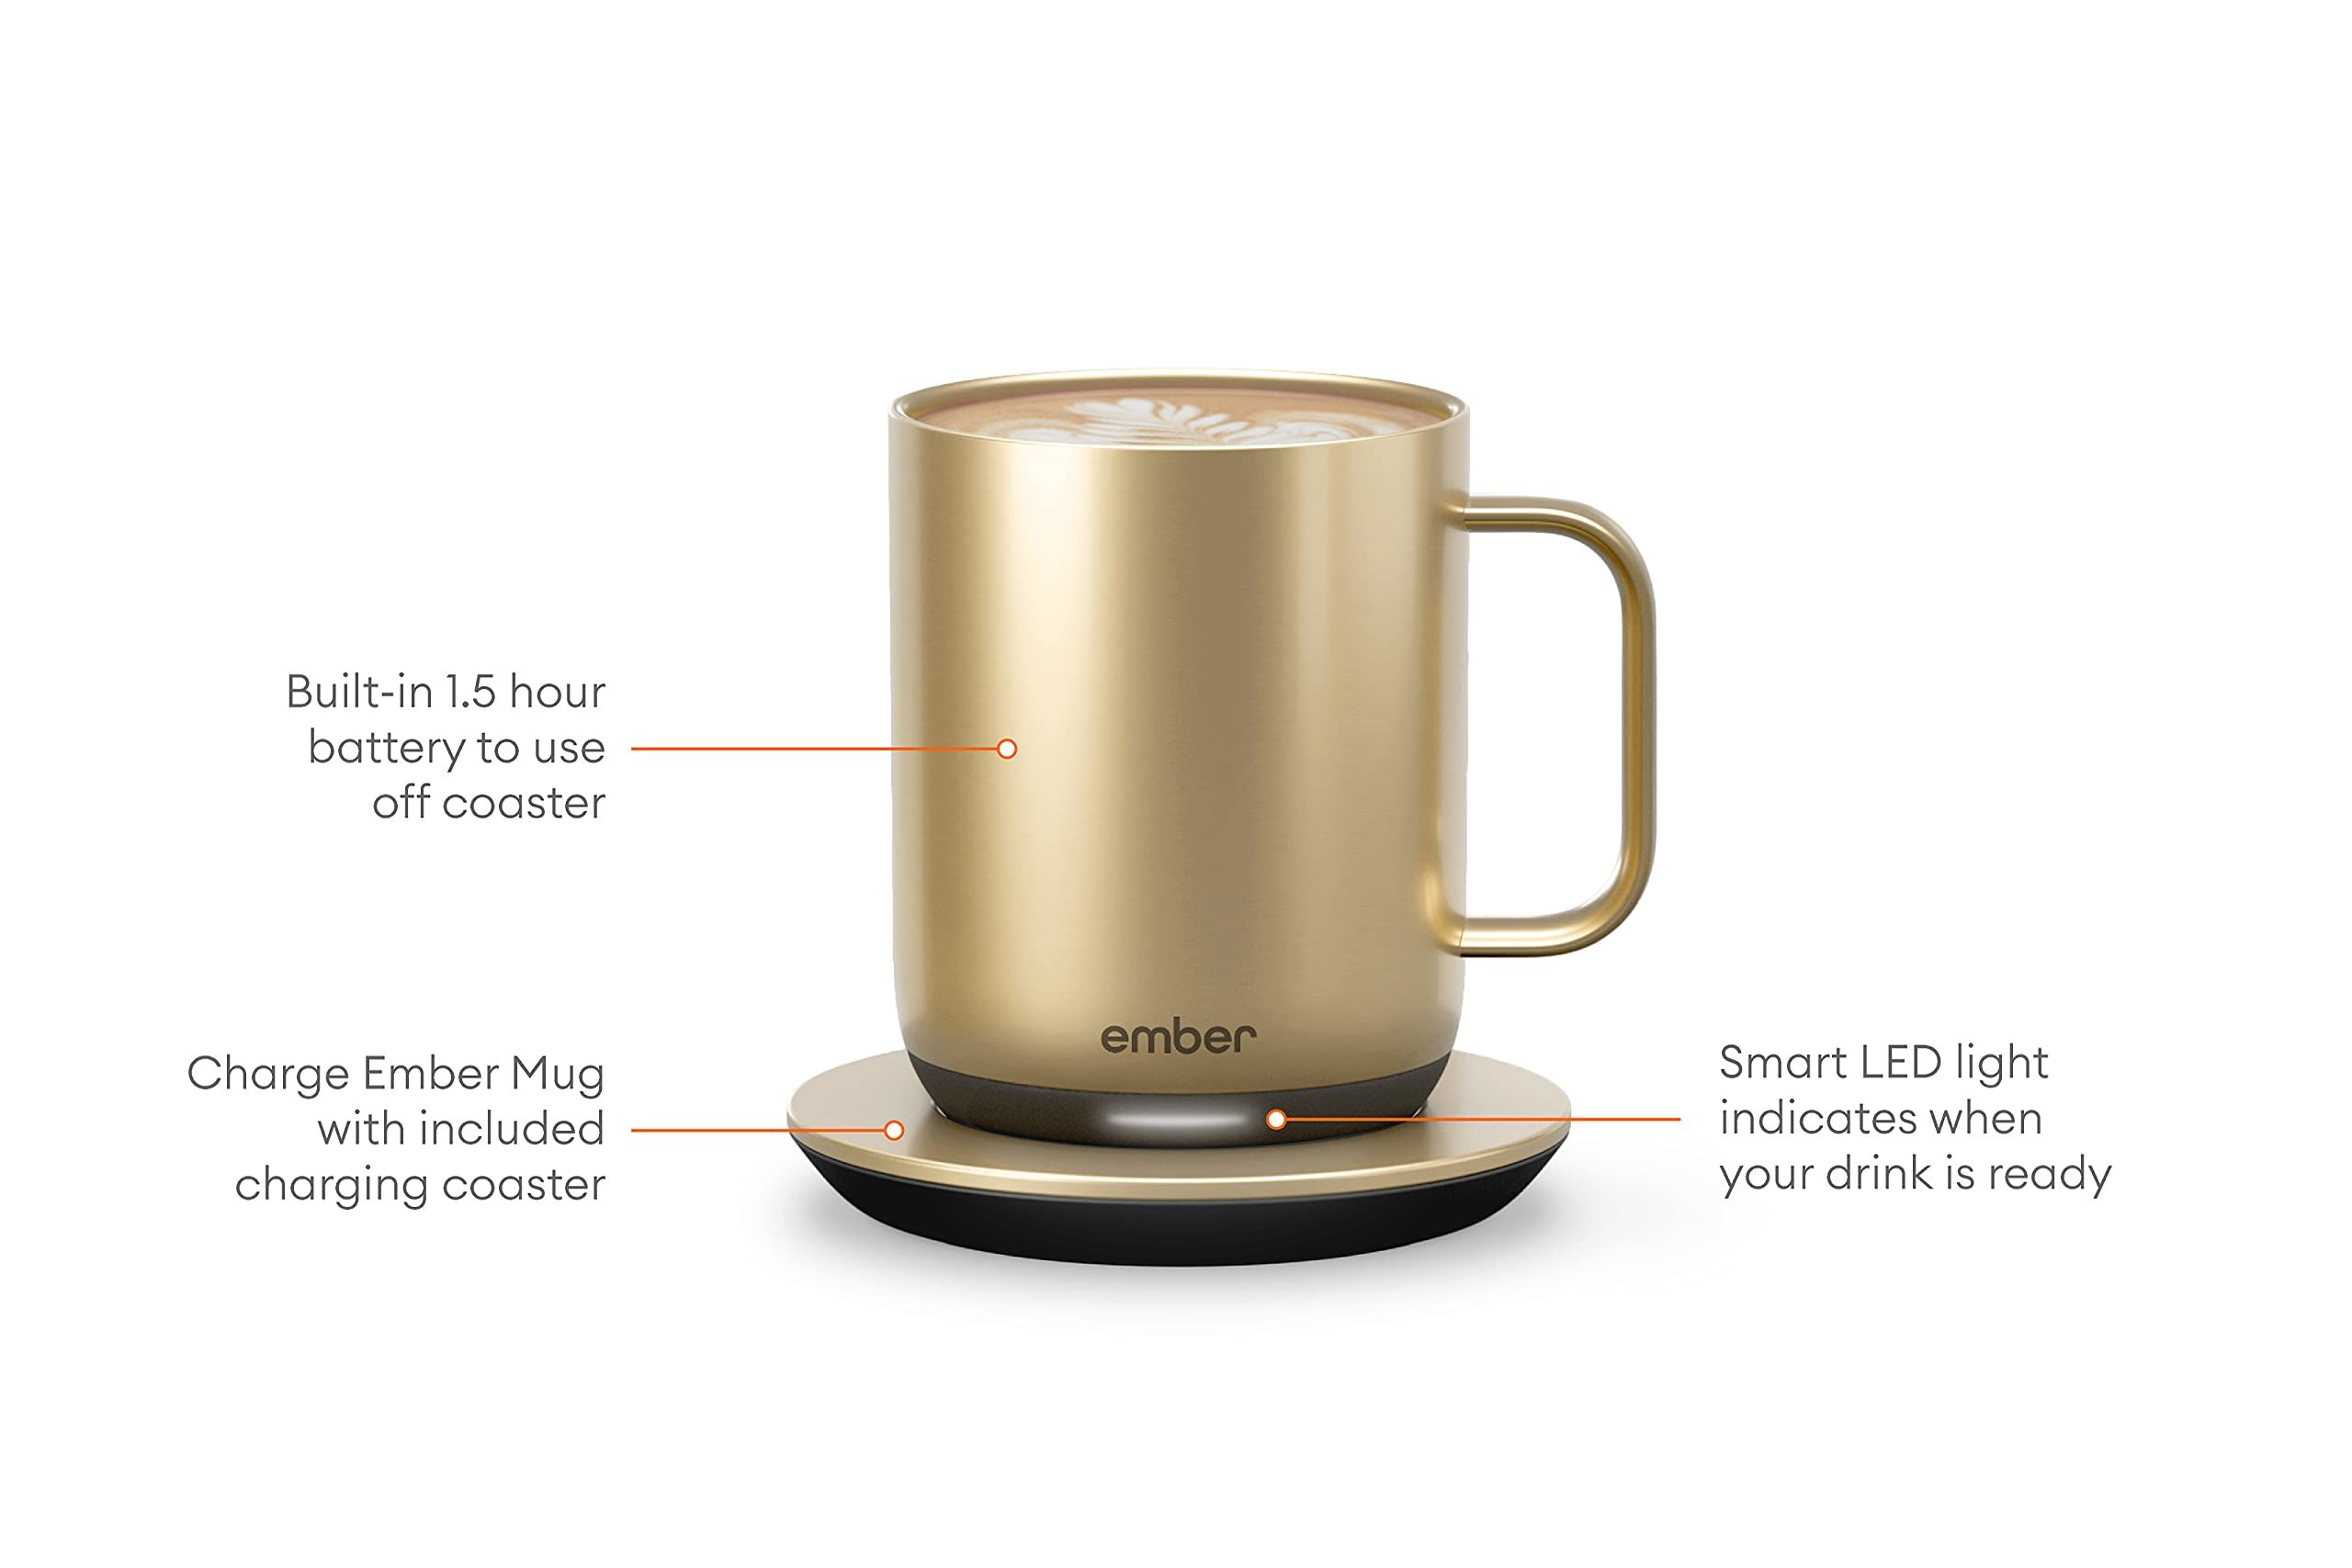 Ember Temperature Control Smart Mug 2, 10 oz, Gold, 1.5-hr Battery Life - App Controlled Heated Coff | Amazon (US)